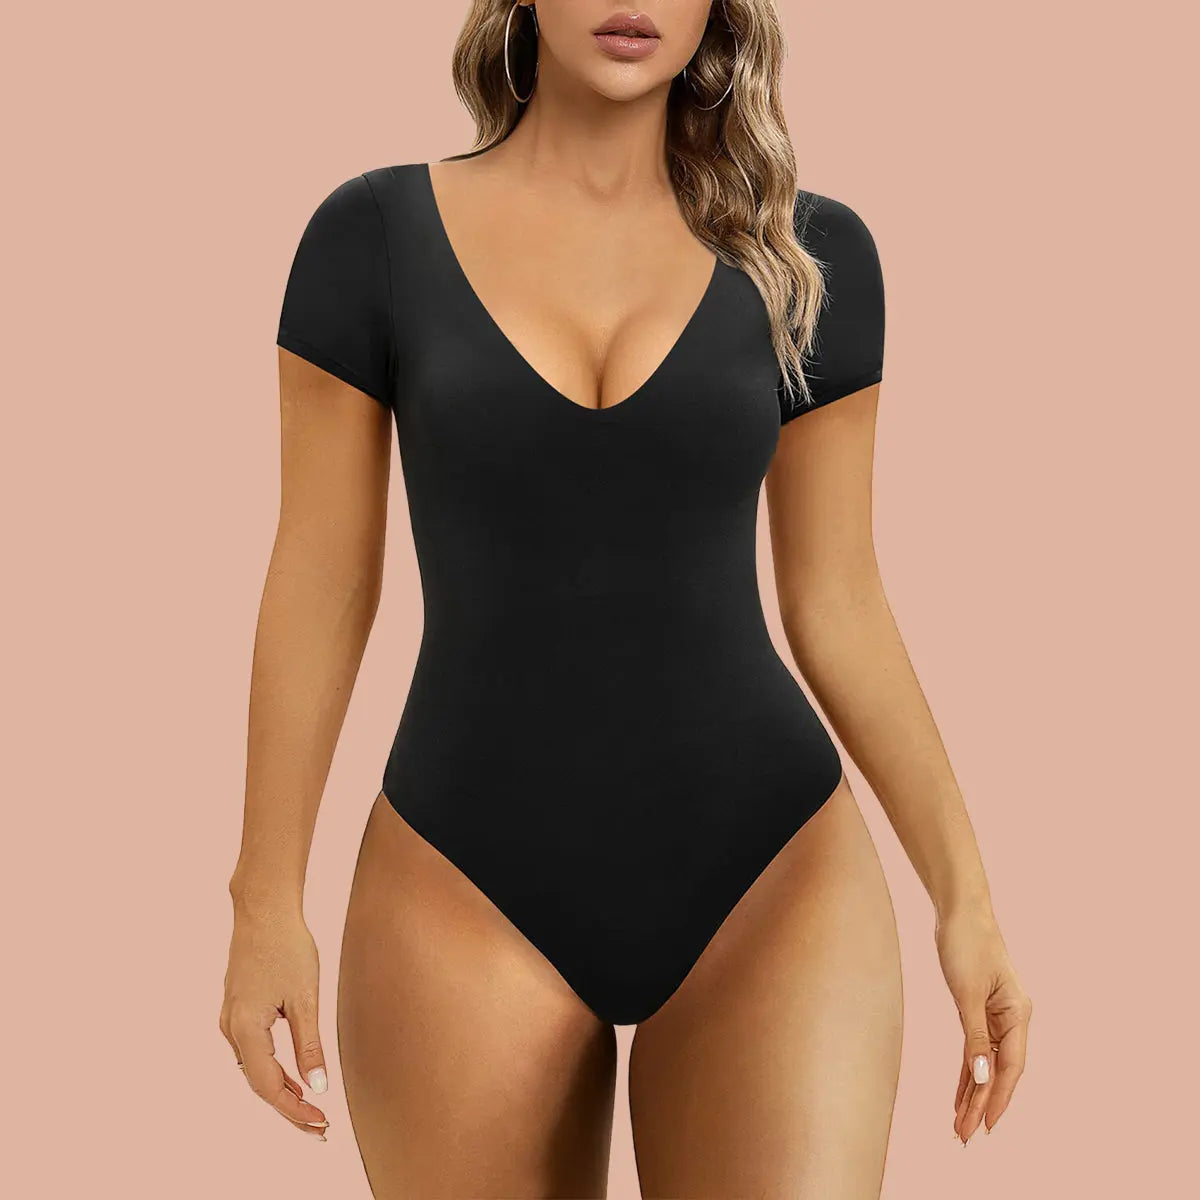 Let's try out the hugging bodysuits! The are the MUSt HAVES! “Fits